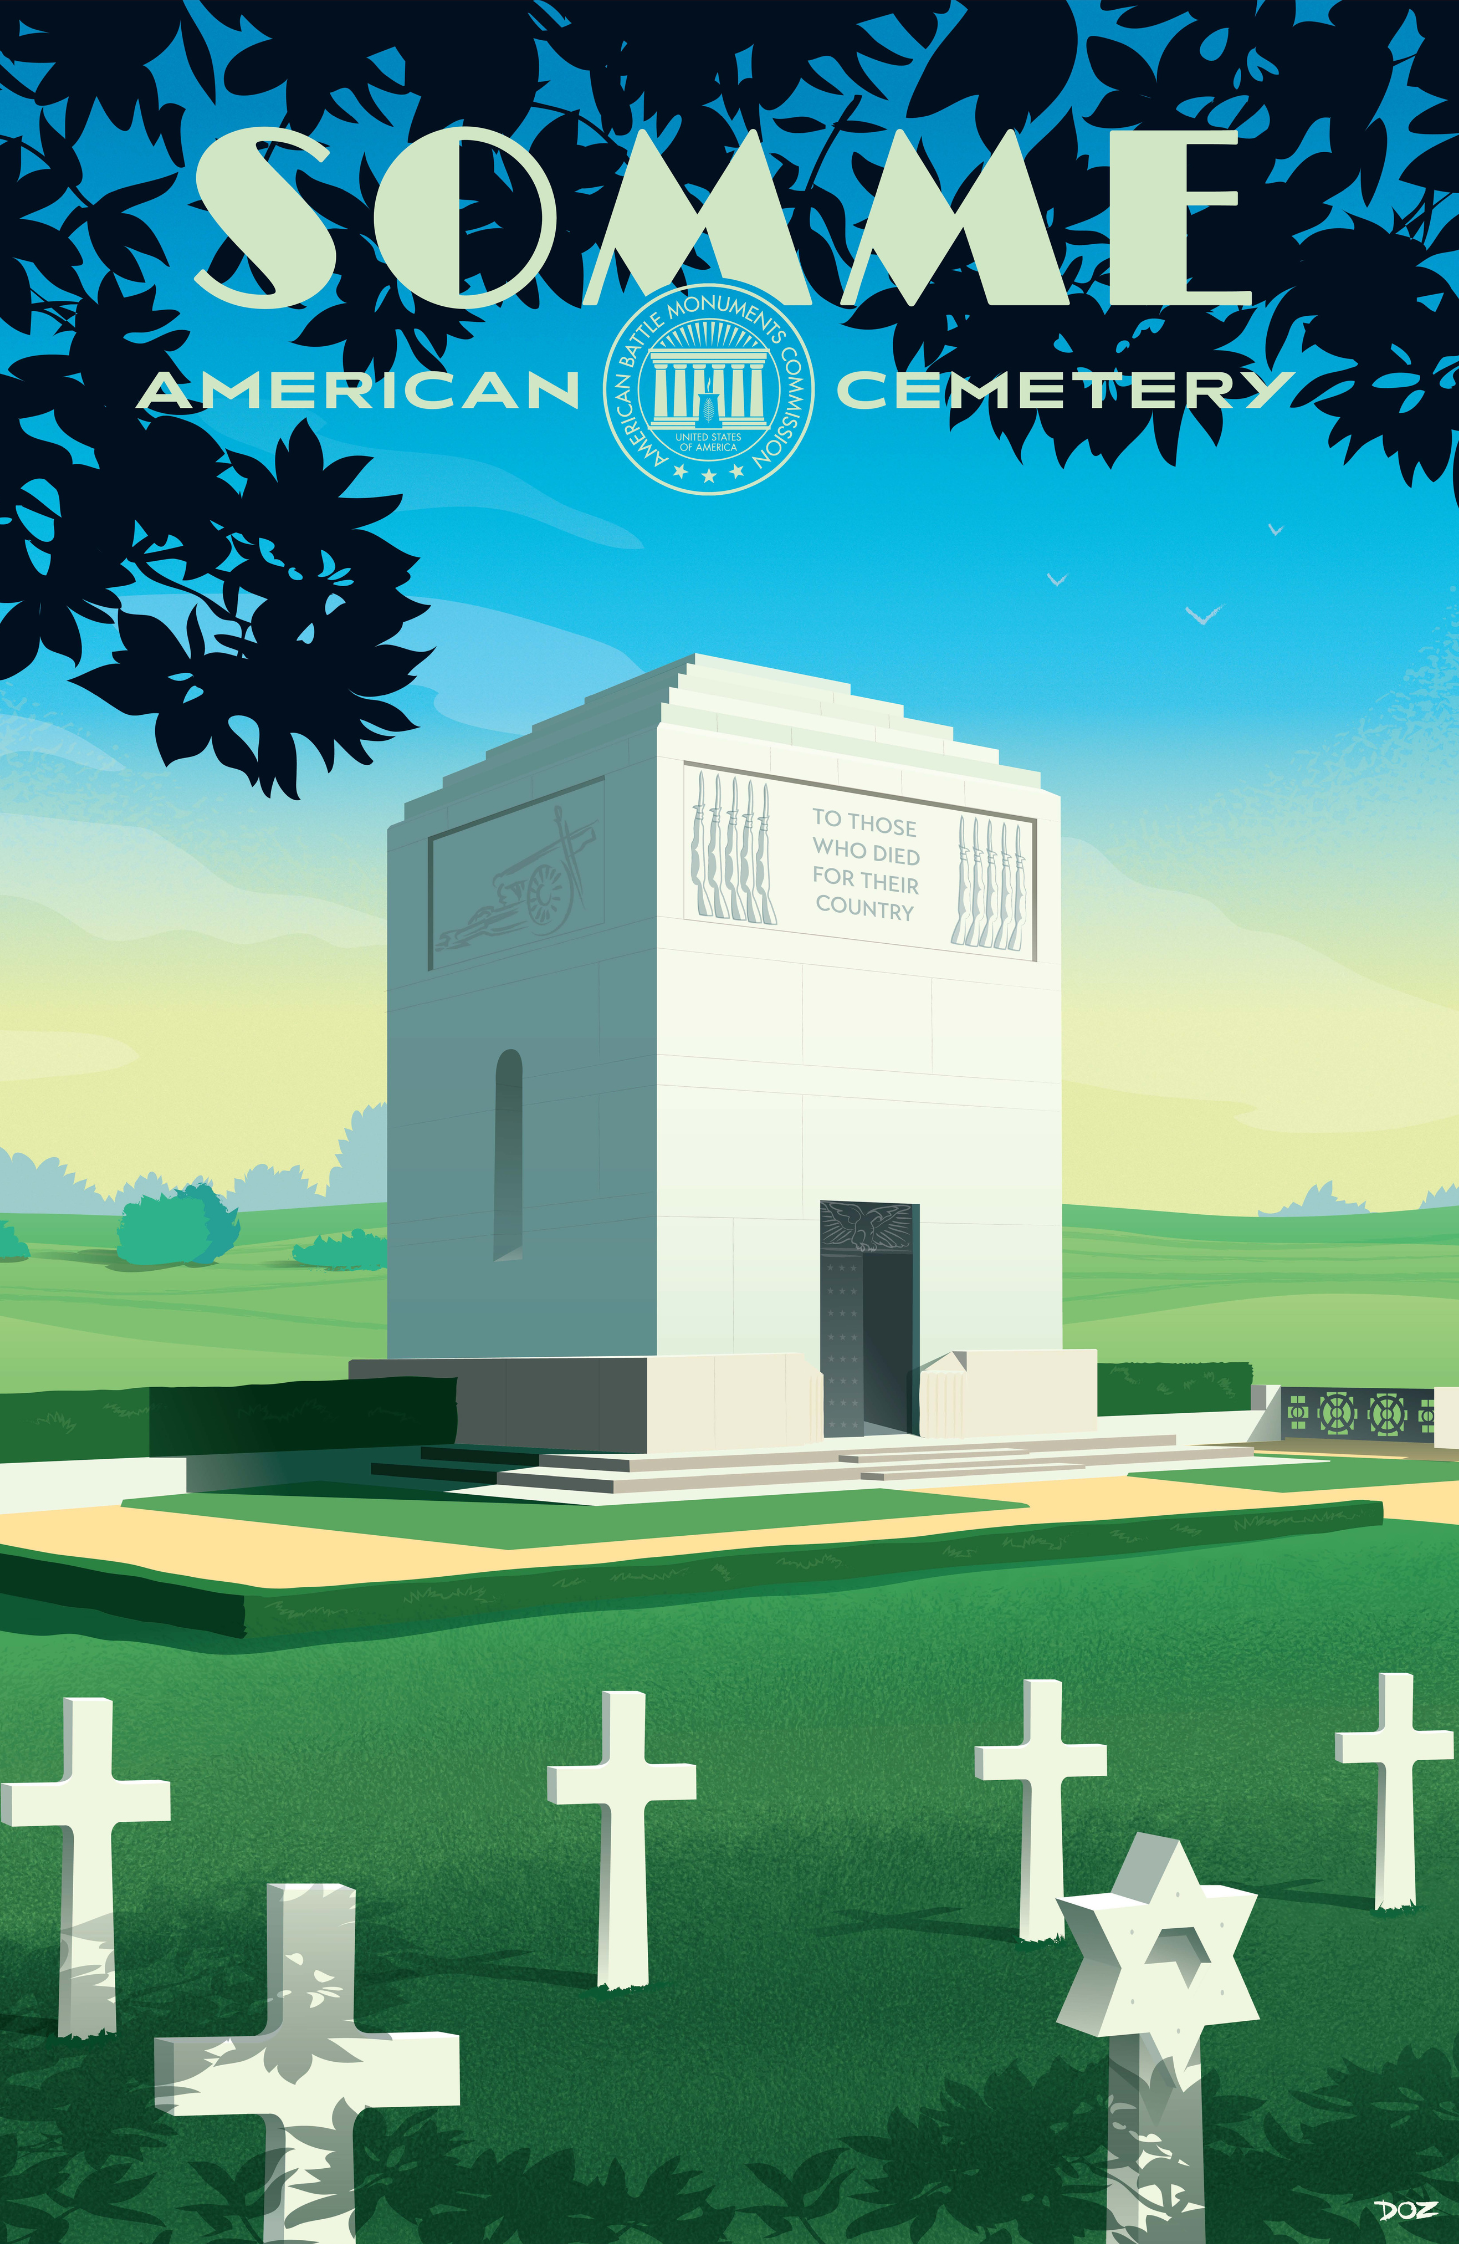 Vintage poster of Somme American Cemetery